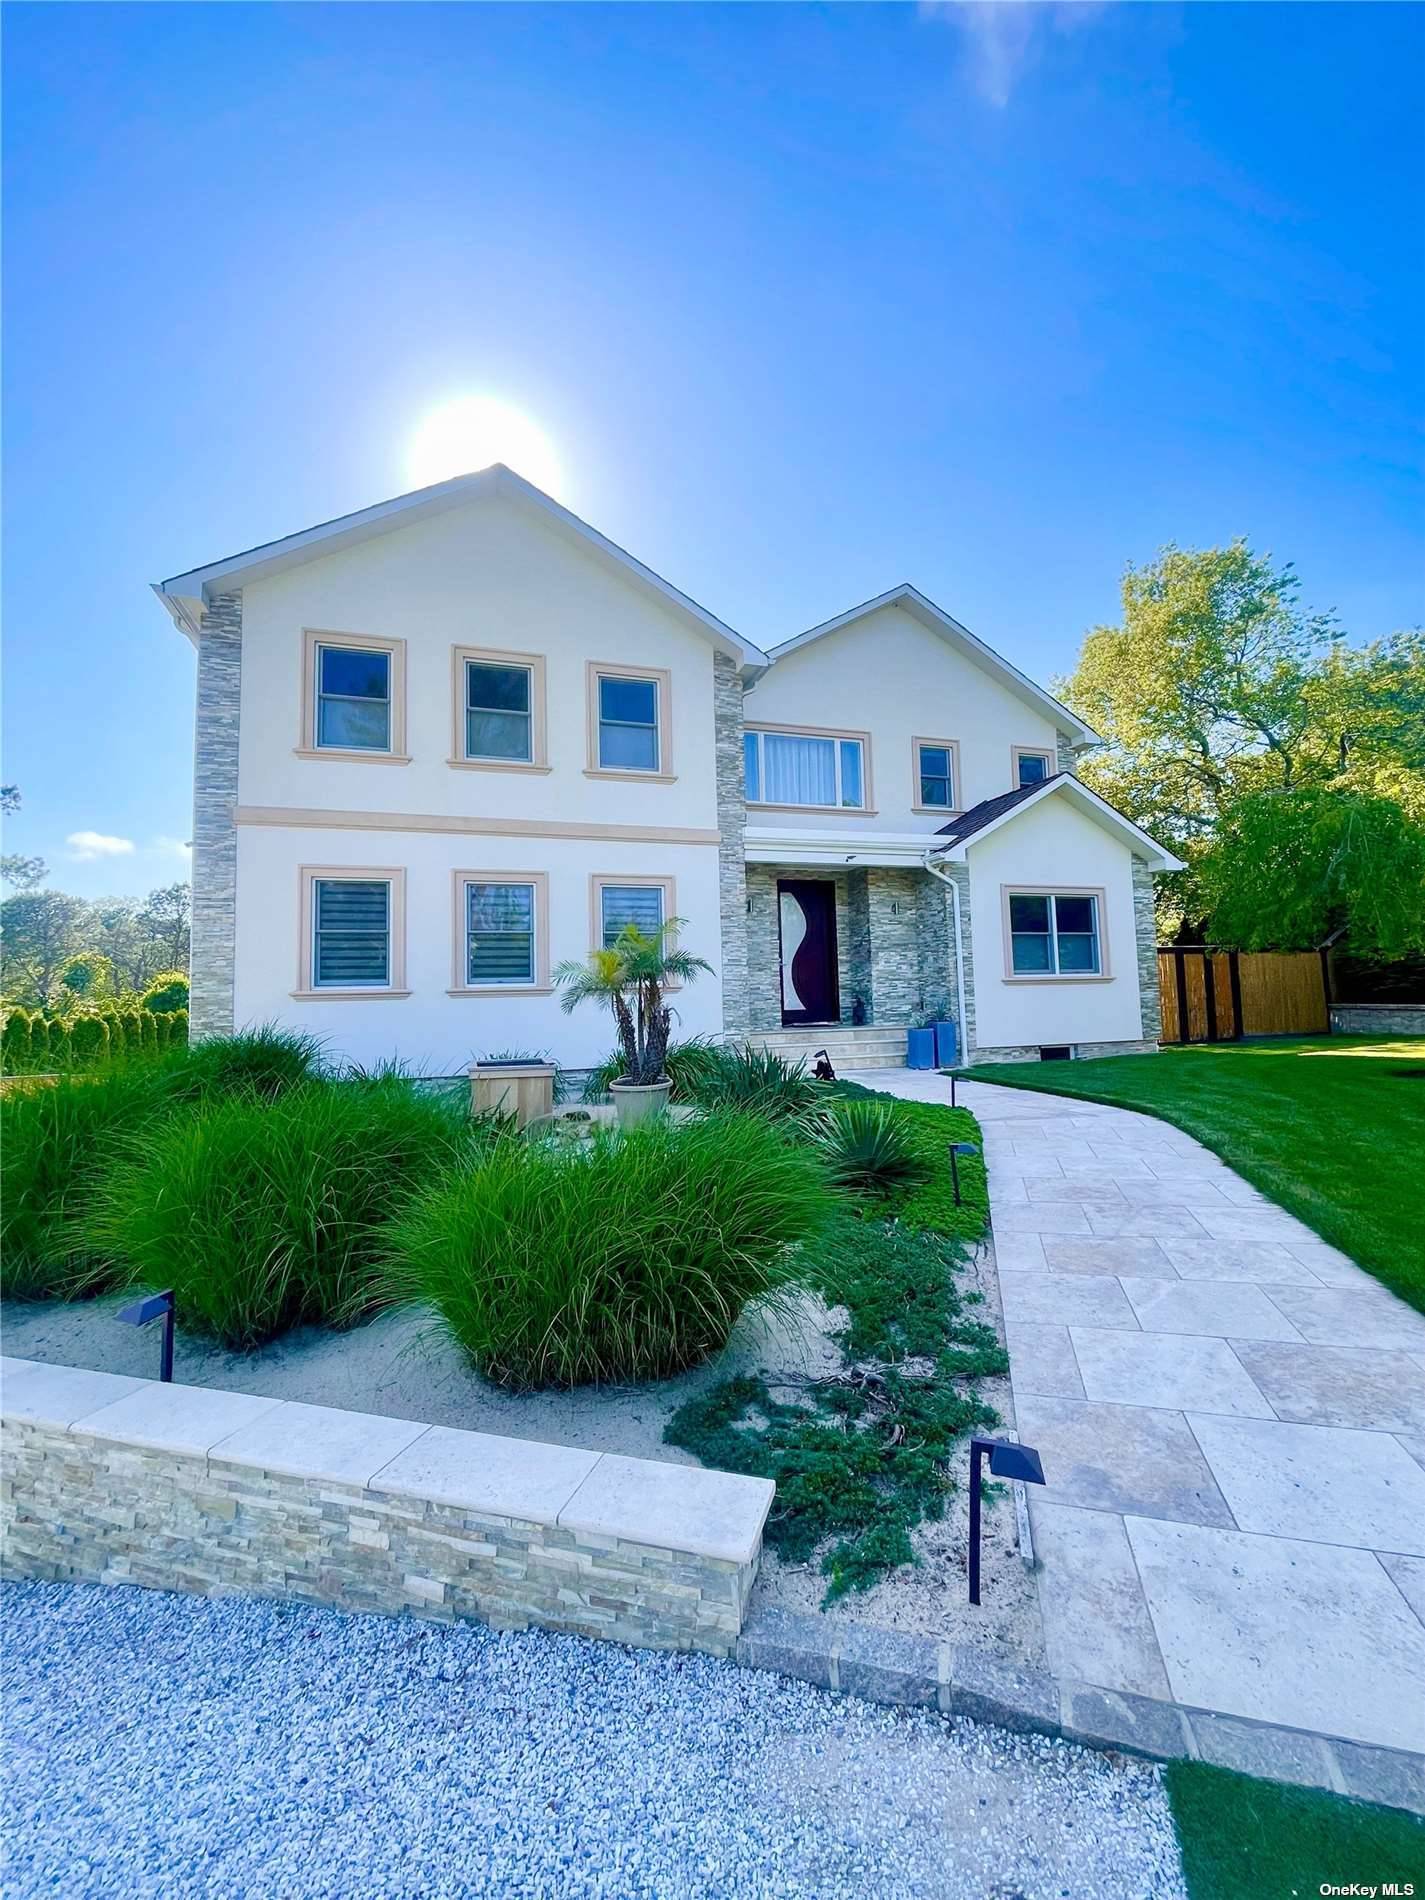 You can have it all with this modern, European, custom built home with unrepeated fine touches of craftmanship in every room and situated on a large secluded lot.